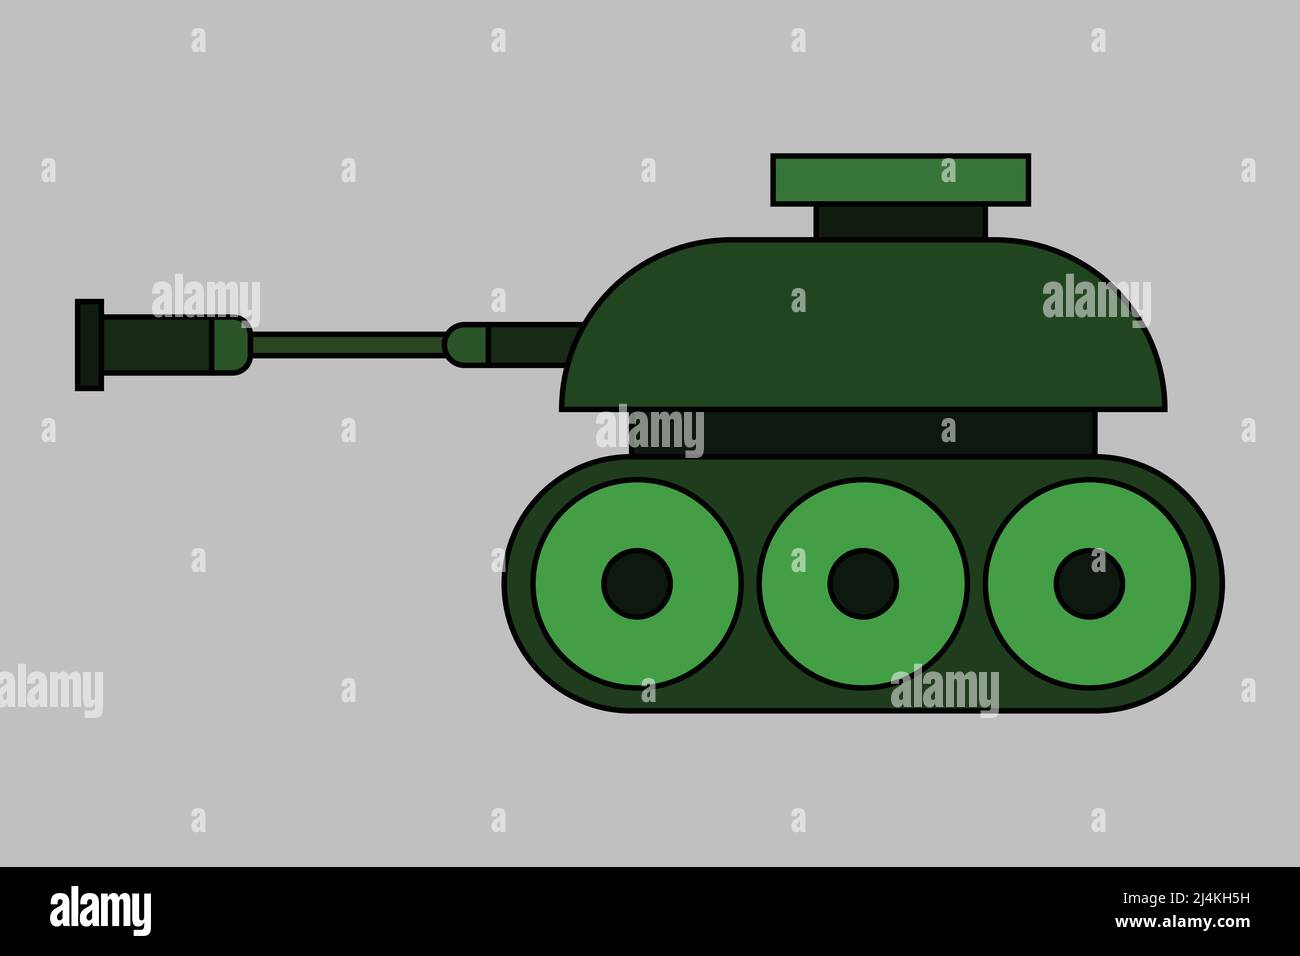 Tank side view flat design icon vector illustration Stock Vector